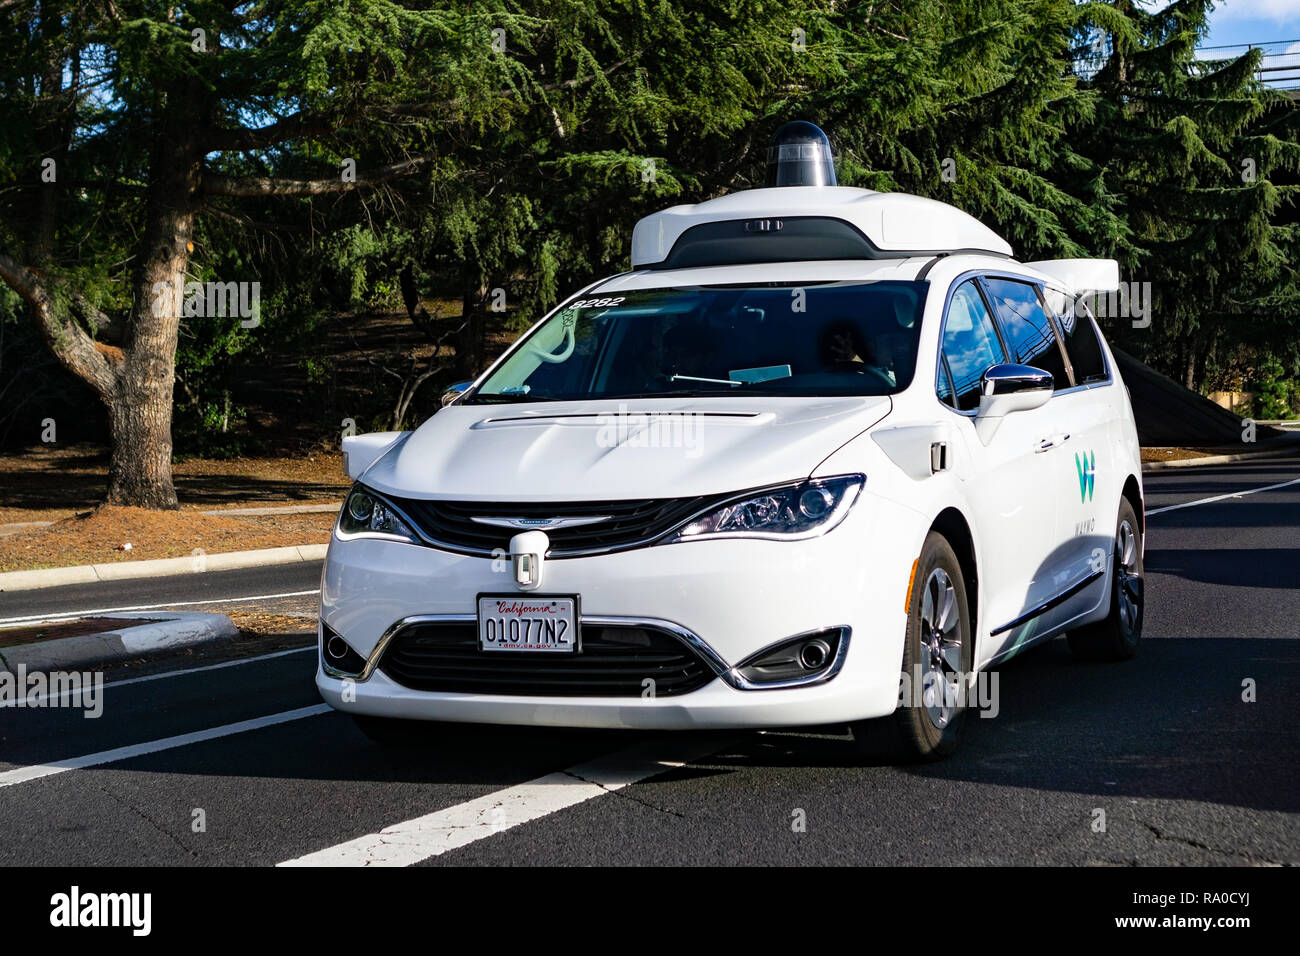 December 23, 2018 Mountain View / CA / USA - Waymo self driving car performing tests on a street near Google's headquarters, Silicon Valley Stock Photo